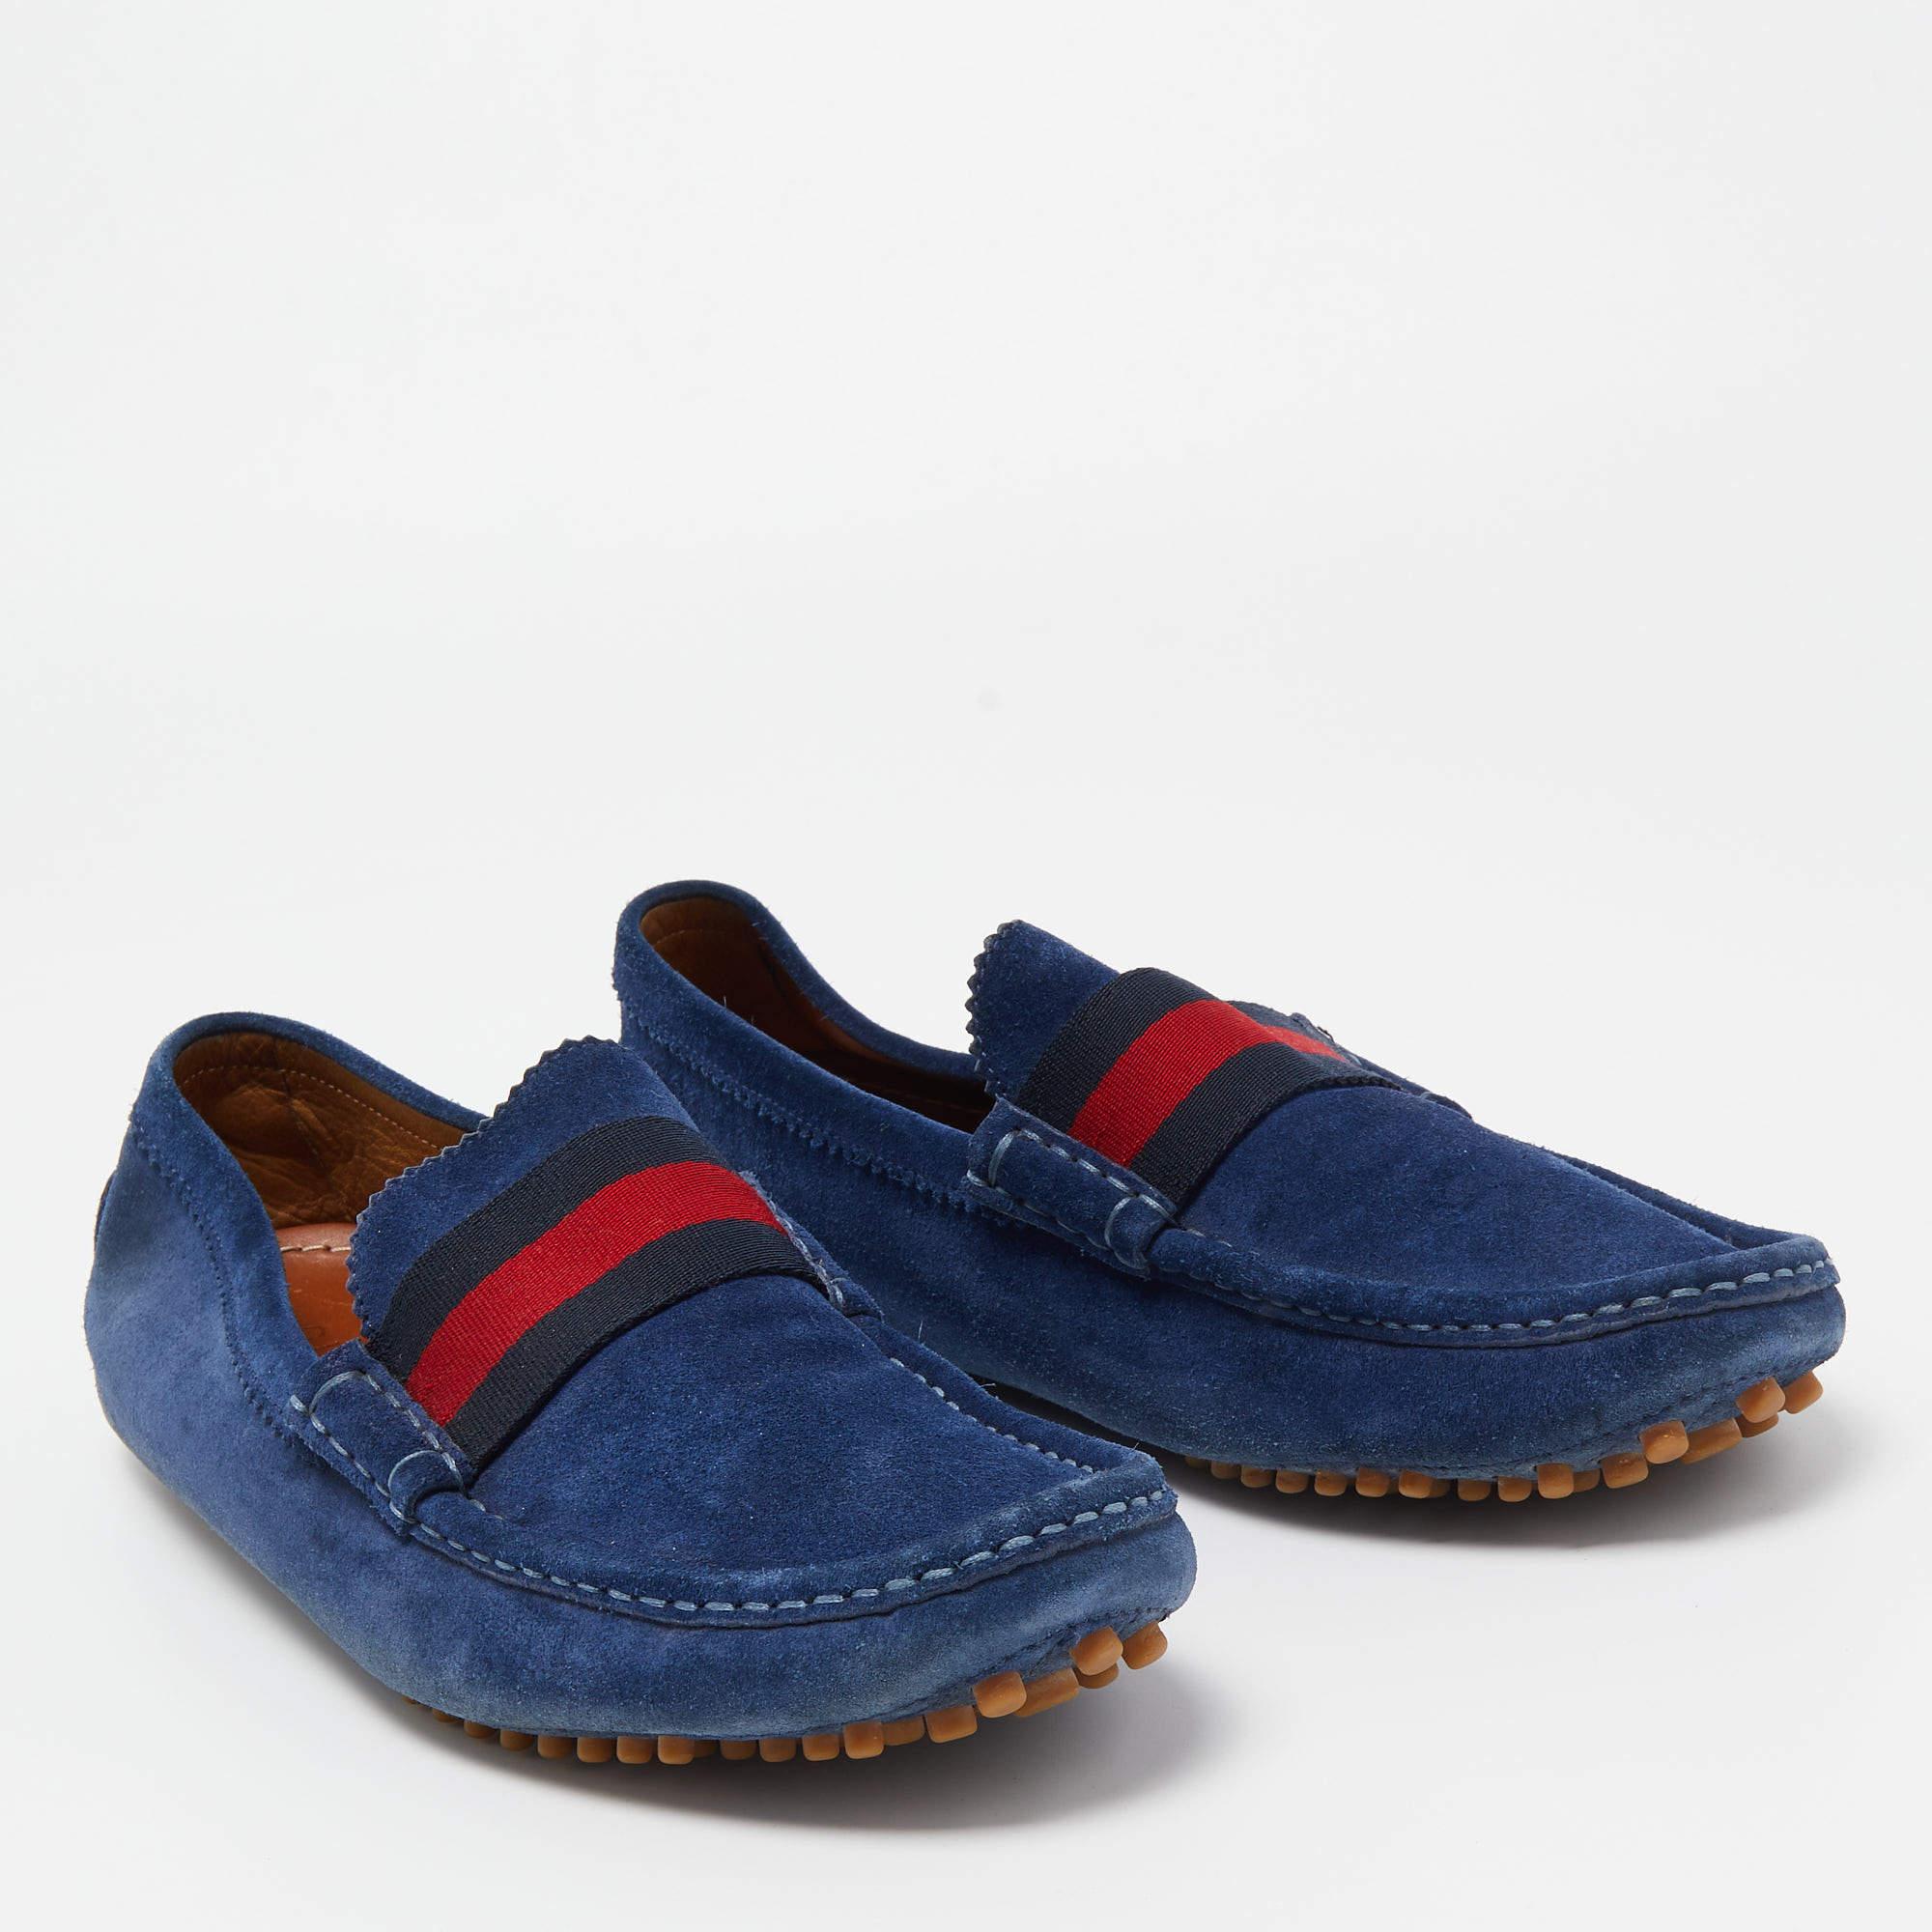 Men's Gucci Blue Suede Web Slip On Loafers Size 42